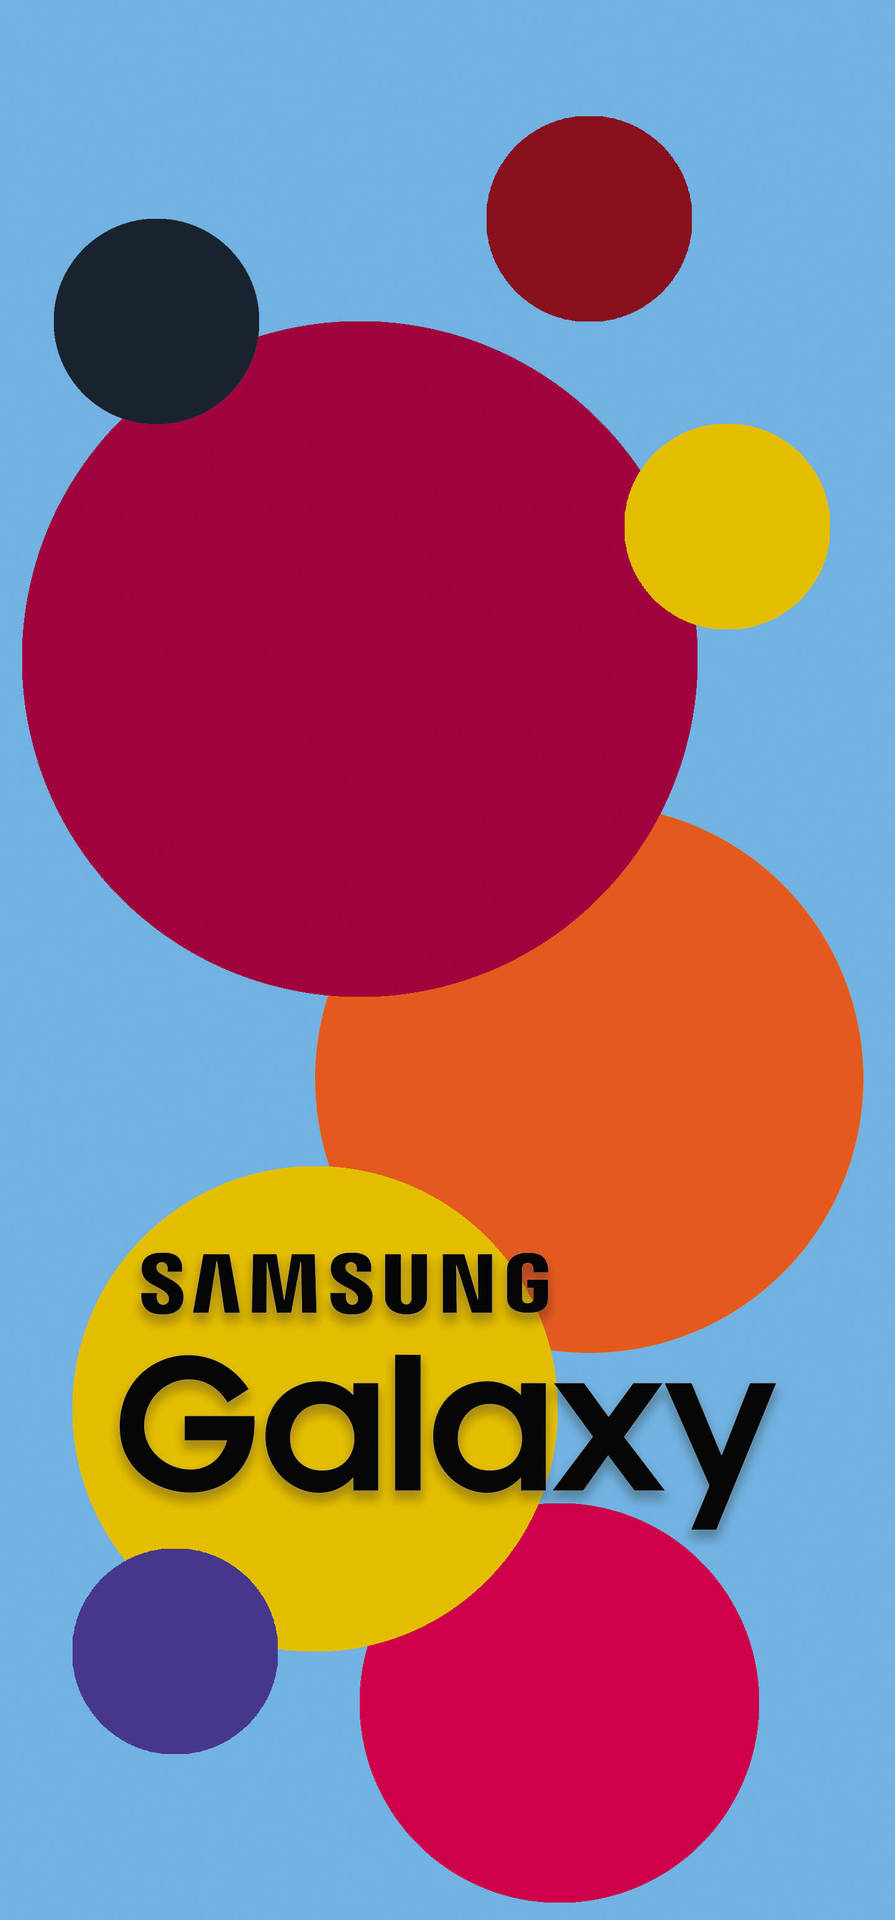 Samsung Galaxy Colorful Circles Picture